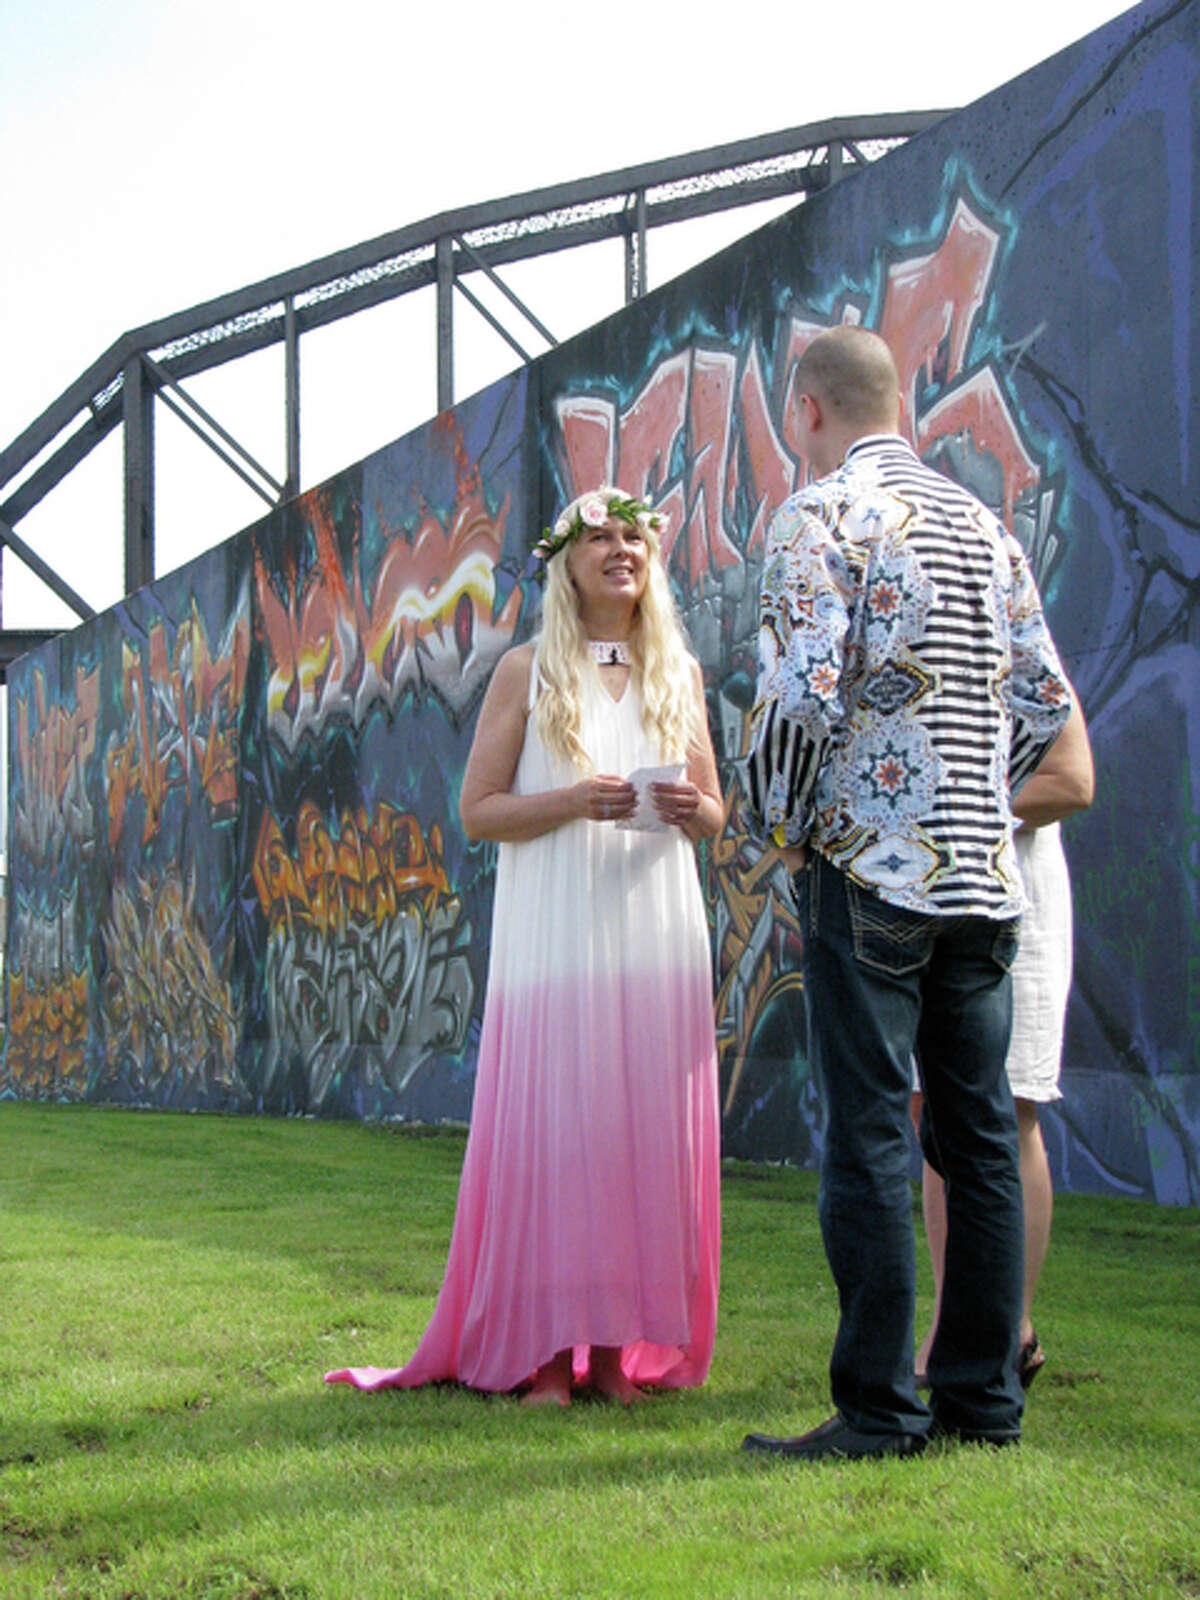 Kasey Bergh and Henry Glendening married on June 27, 2015, three years after they met, in front of a graffiti-covered wall near the St. Louis riverfront. (Lisa Schmitz/TNS)